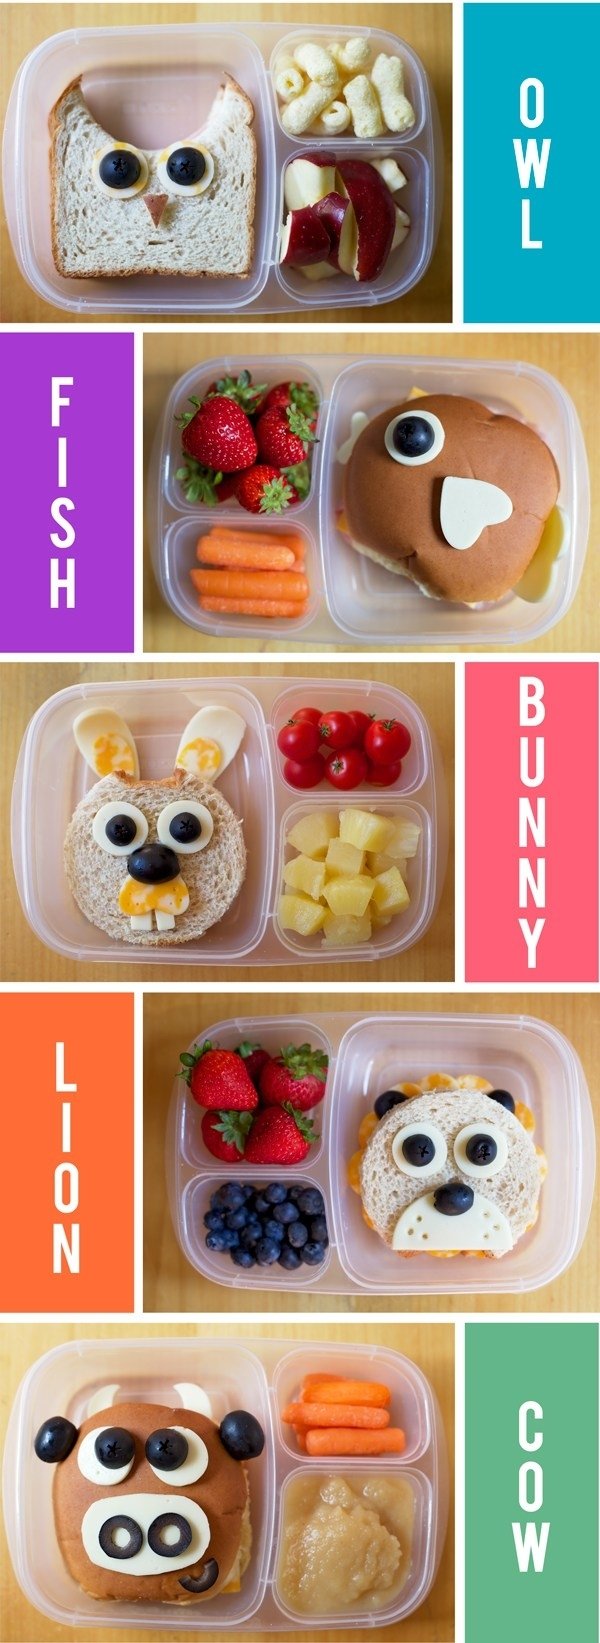 10 Fabulous Lunch Ideas For Kids At School the best school lunch ideas for kids that are fun and easy 6 2022